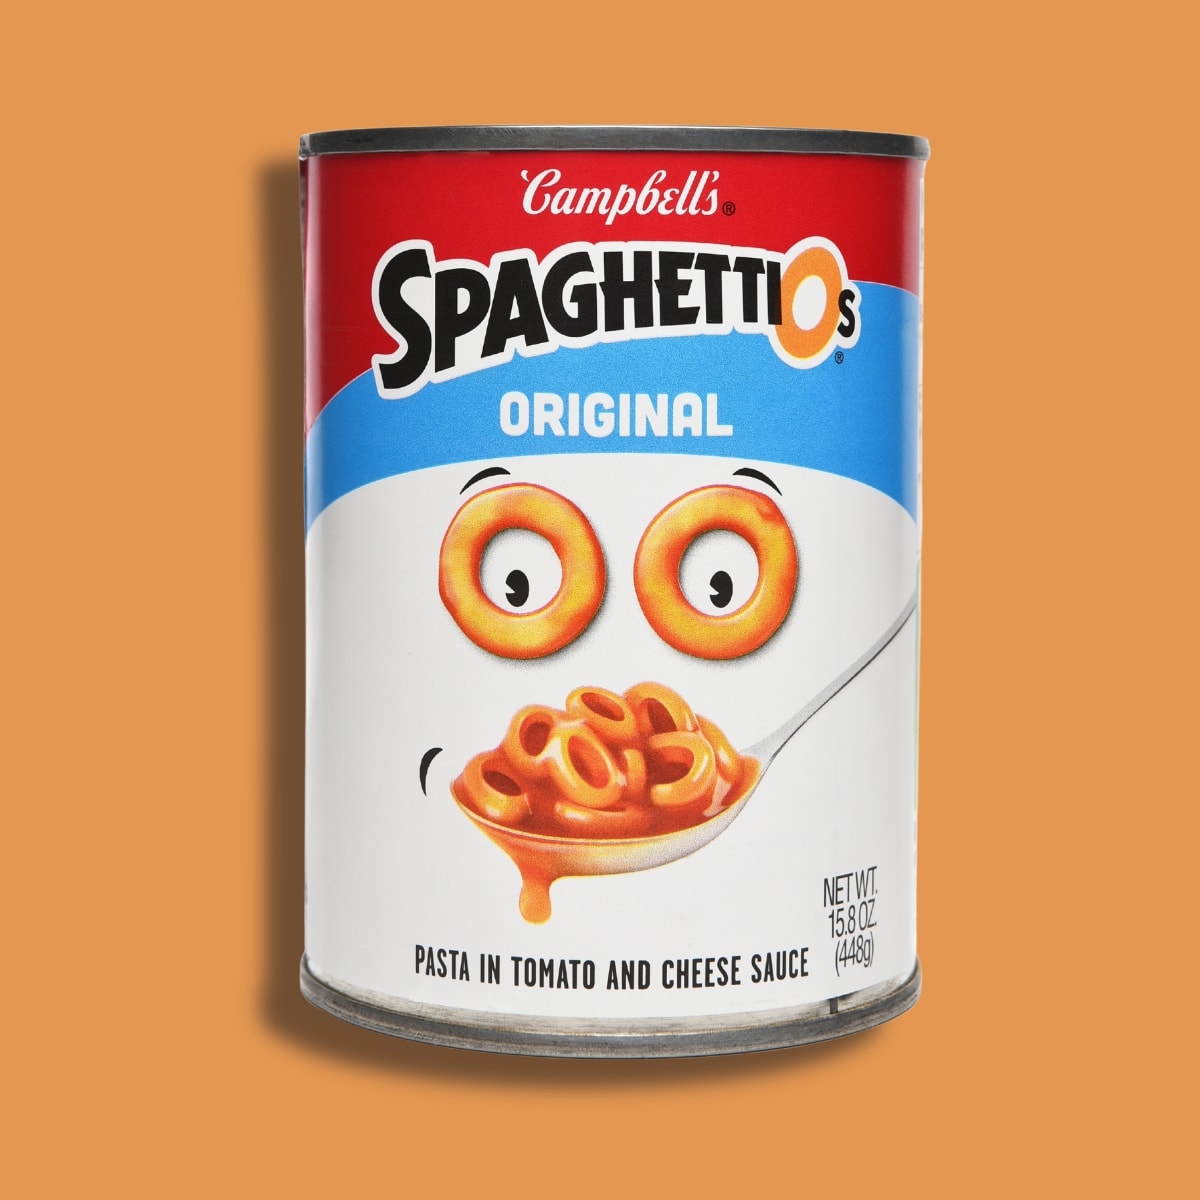 Spaghettios Original Pasta in Tomato and Cheese Sauce in a Can